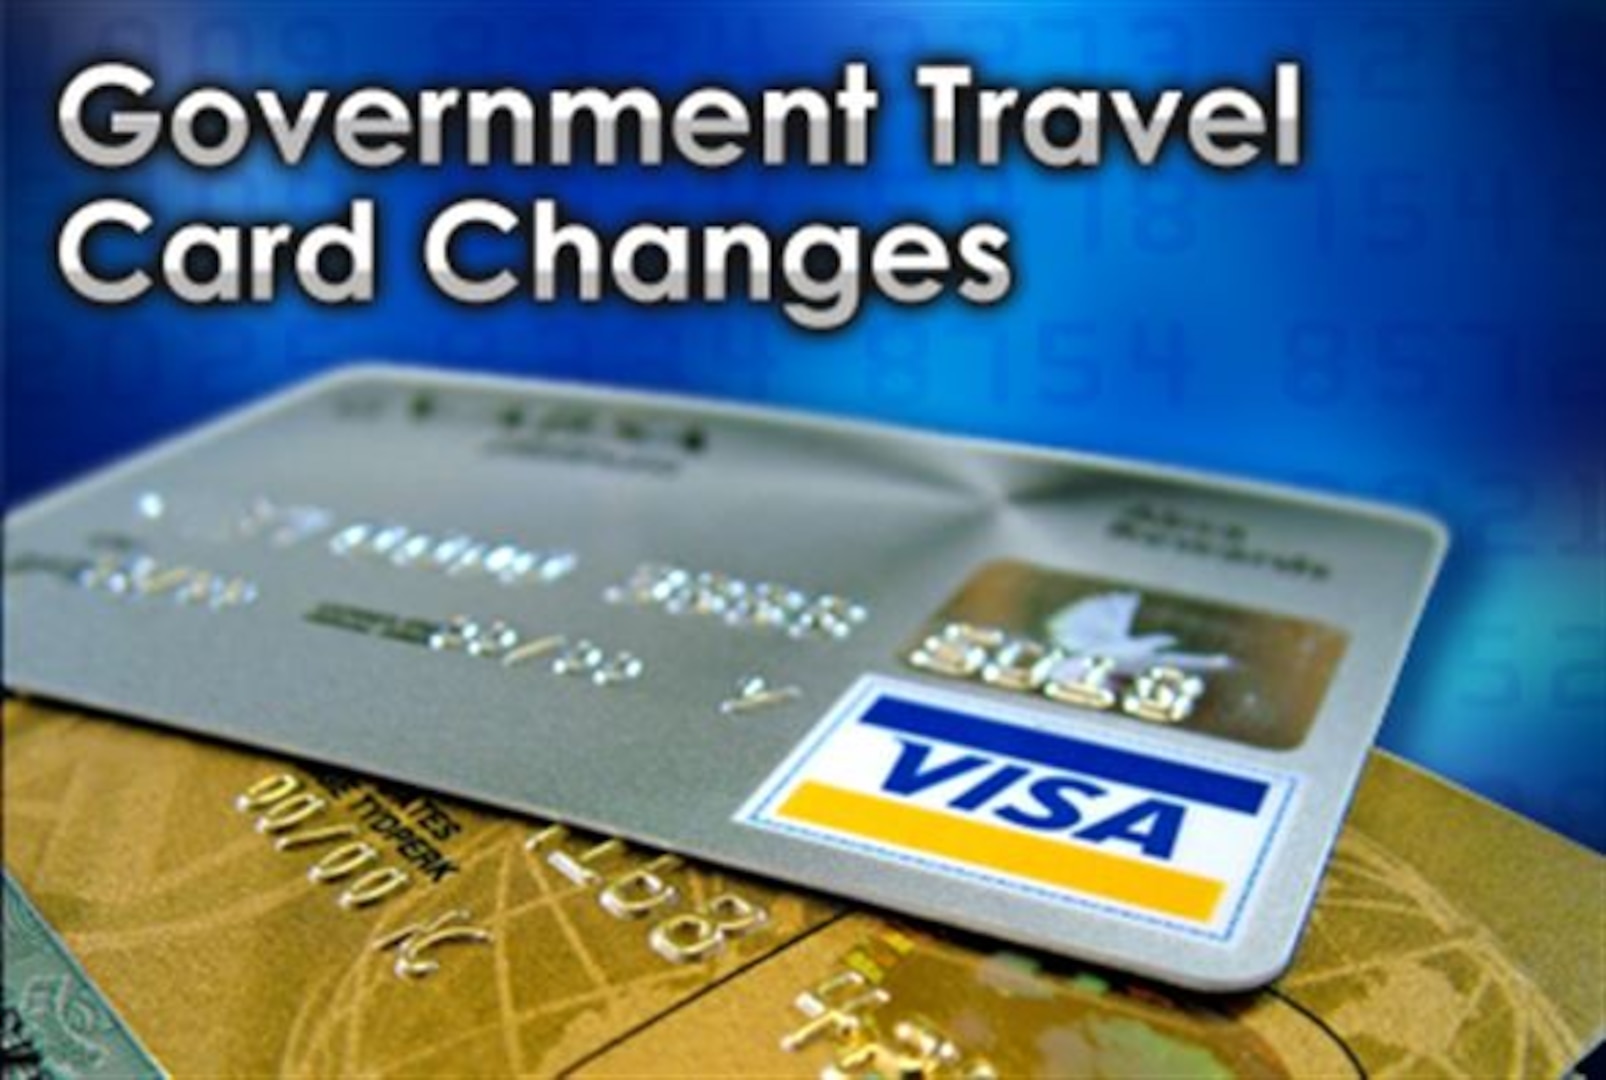 Beware of common misfires with government travel charge card